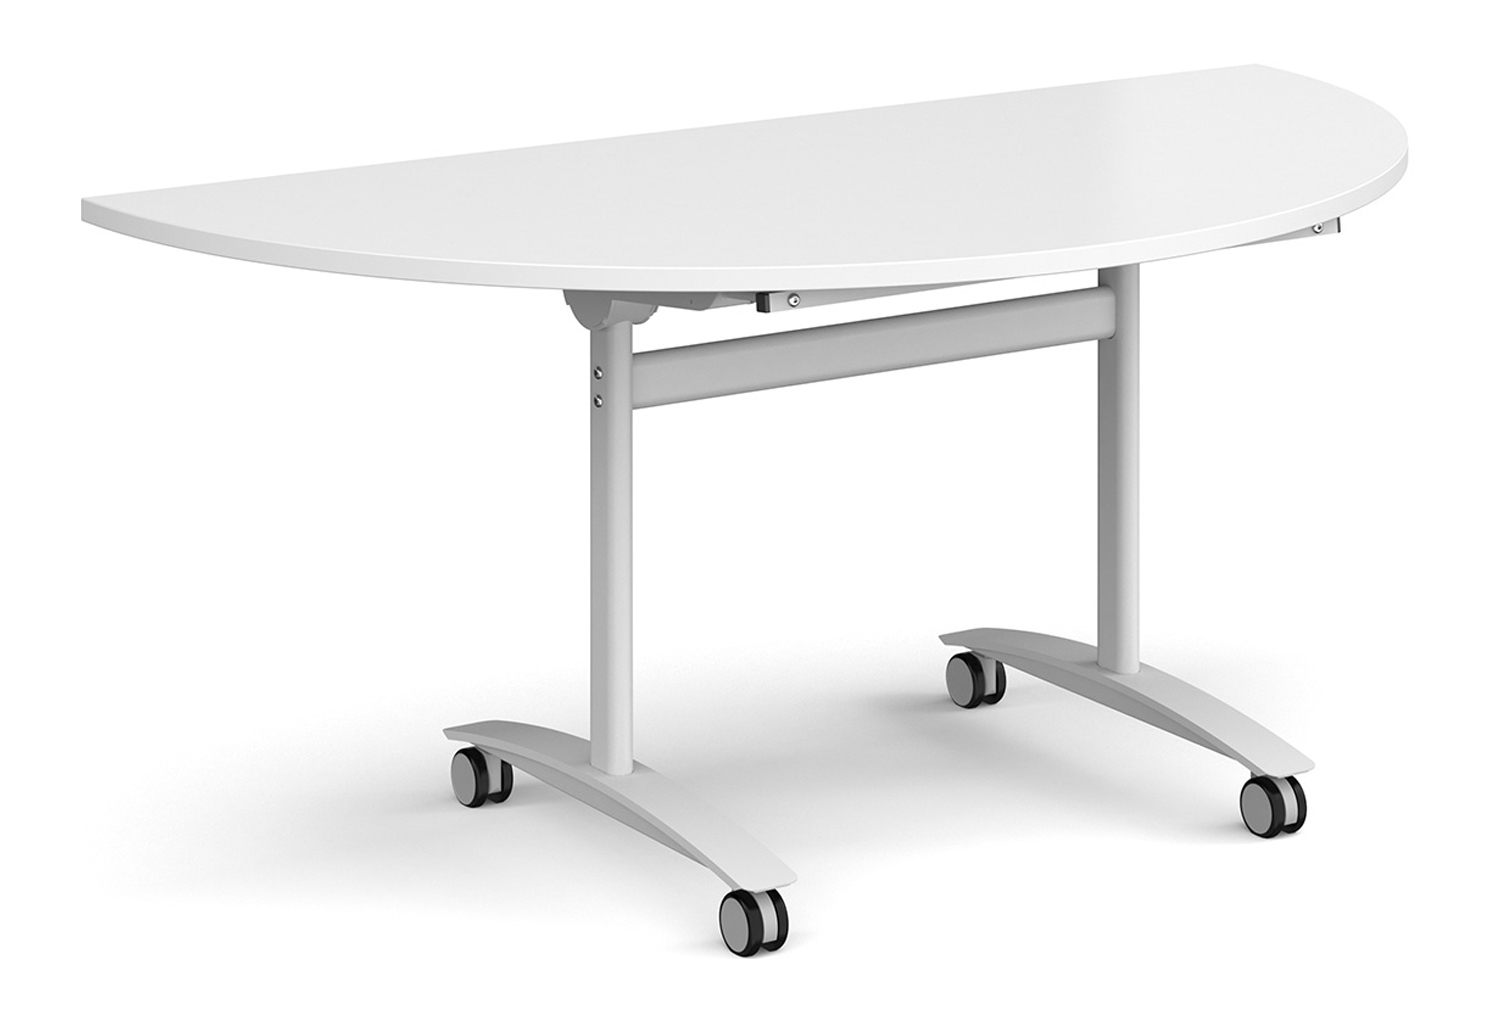 Carousel Semi Circular Flip Top Meeting Mobile Tables, White Frame, White, Express Delivery